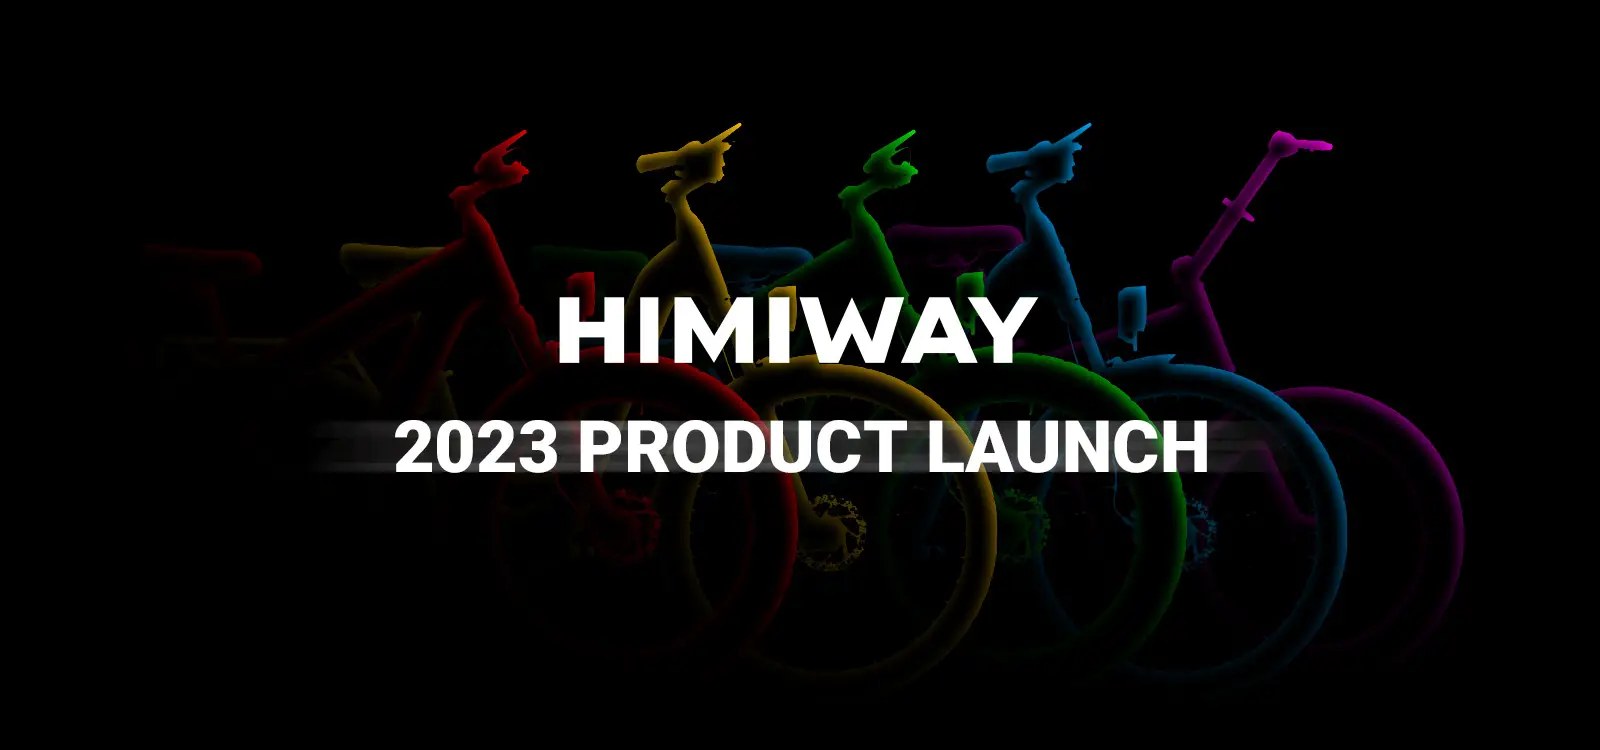 Himiway Launches New Mission and Products to Revolutionize E-Bike Transportation 1